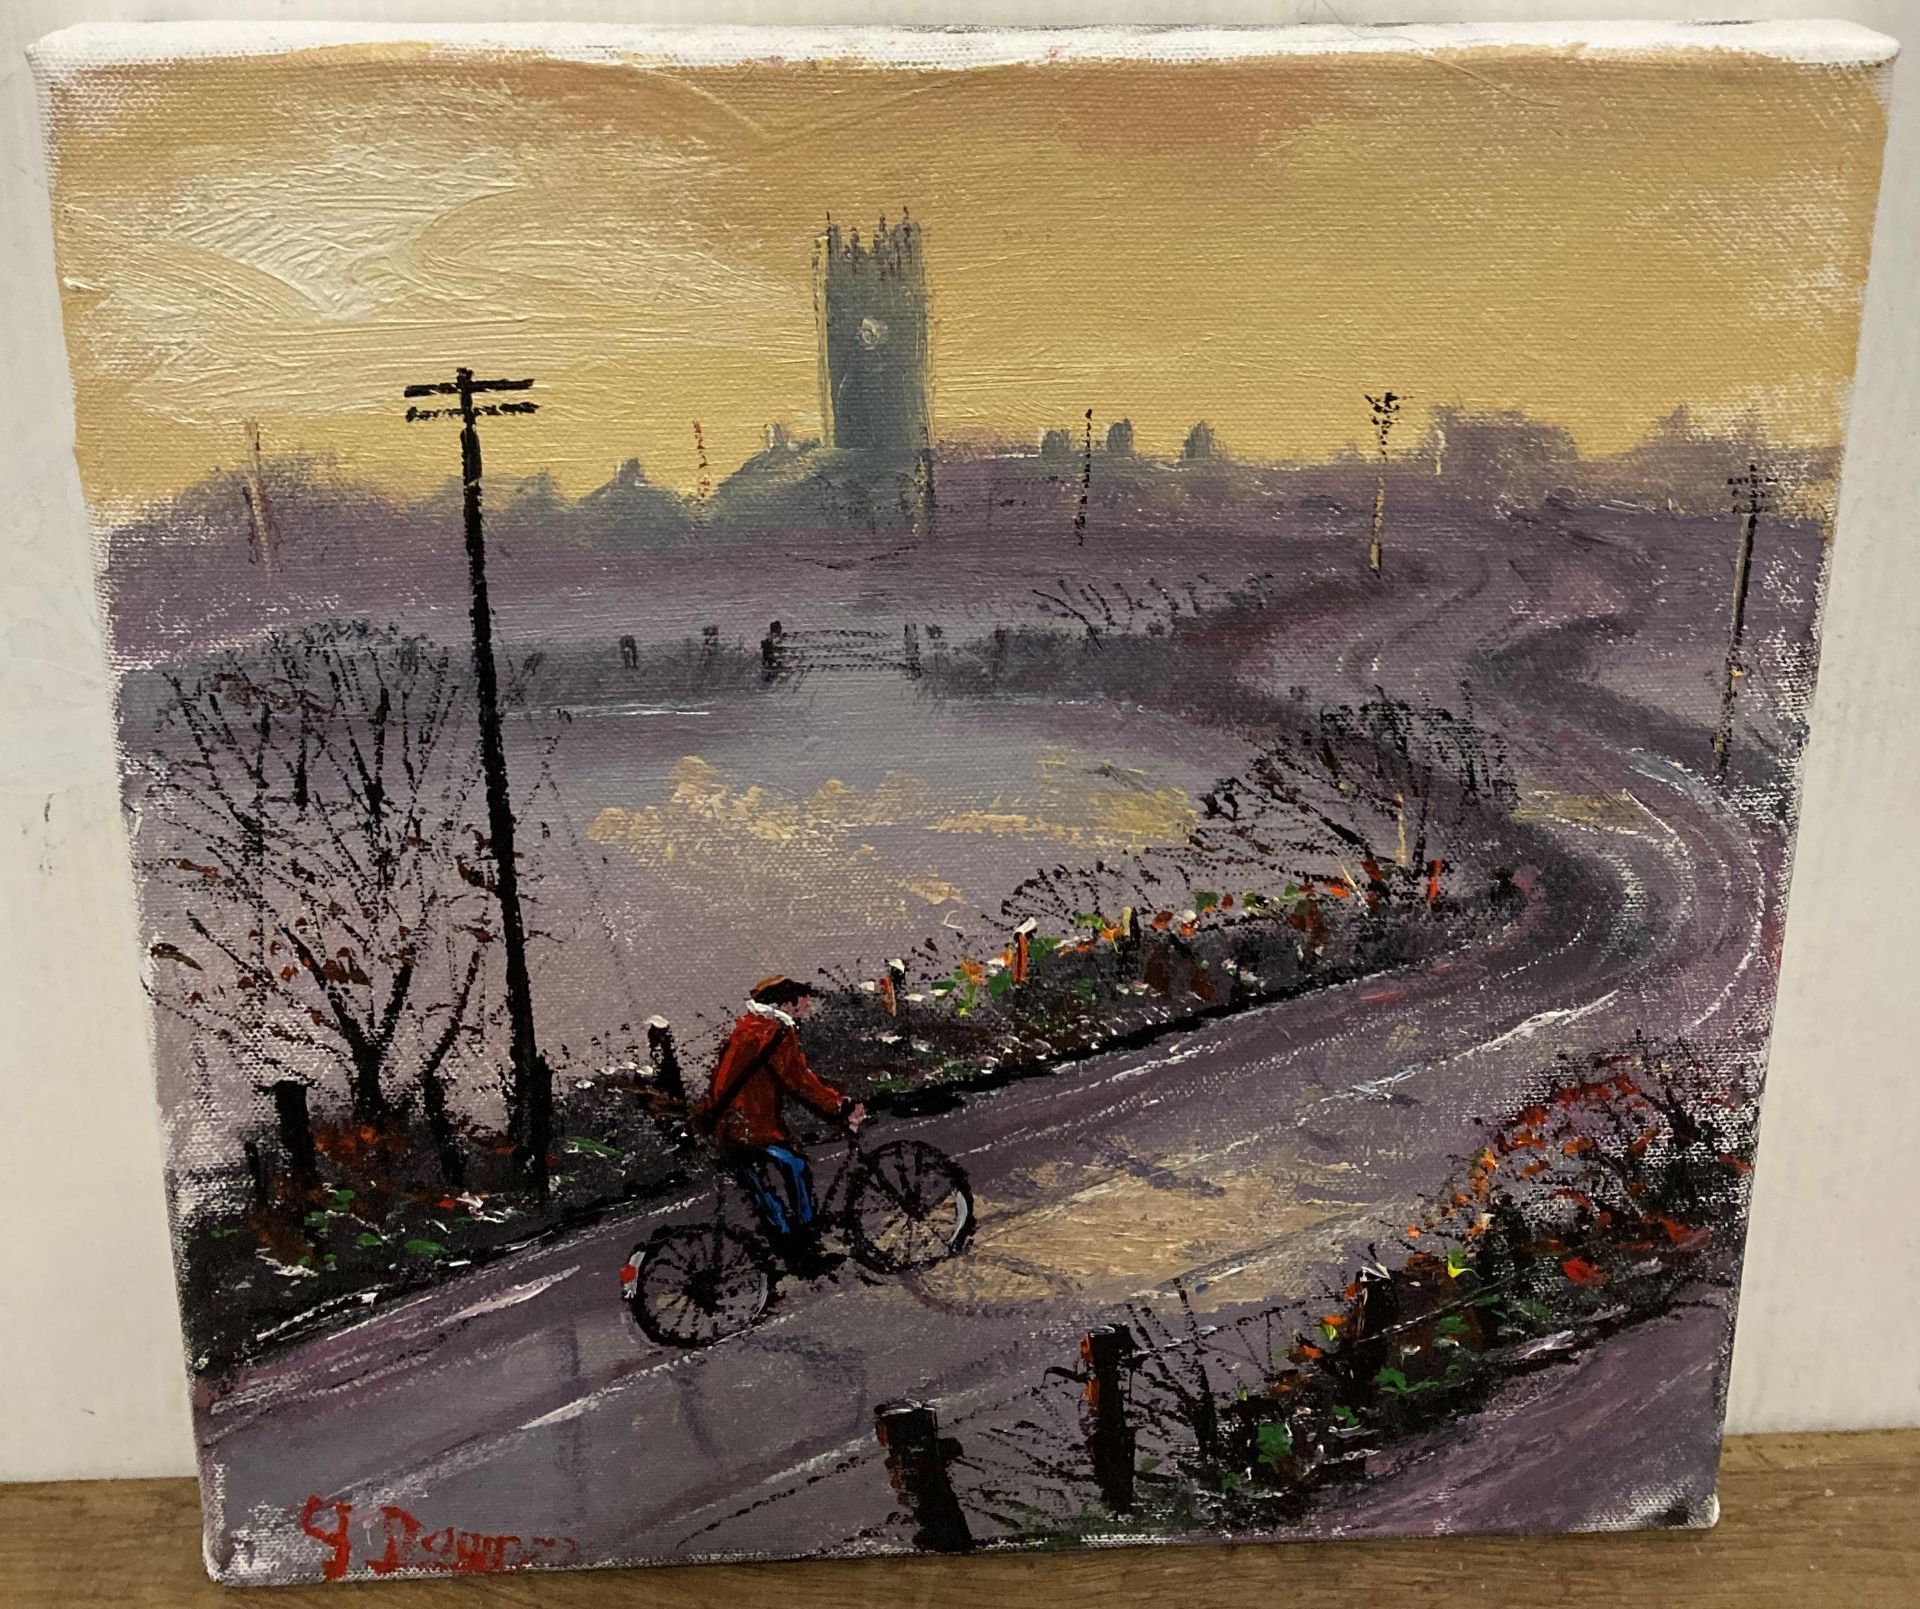 † James Downie oil on canvas 'Bike Ride in The Countryside' 30cm x 30cm,